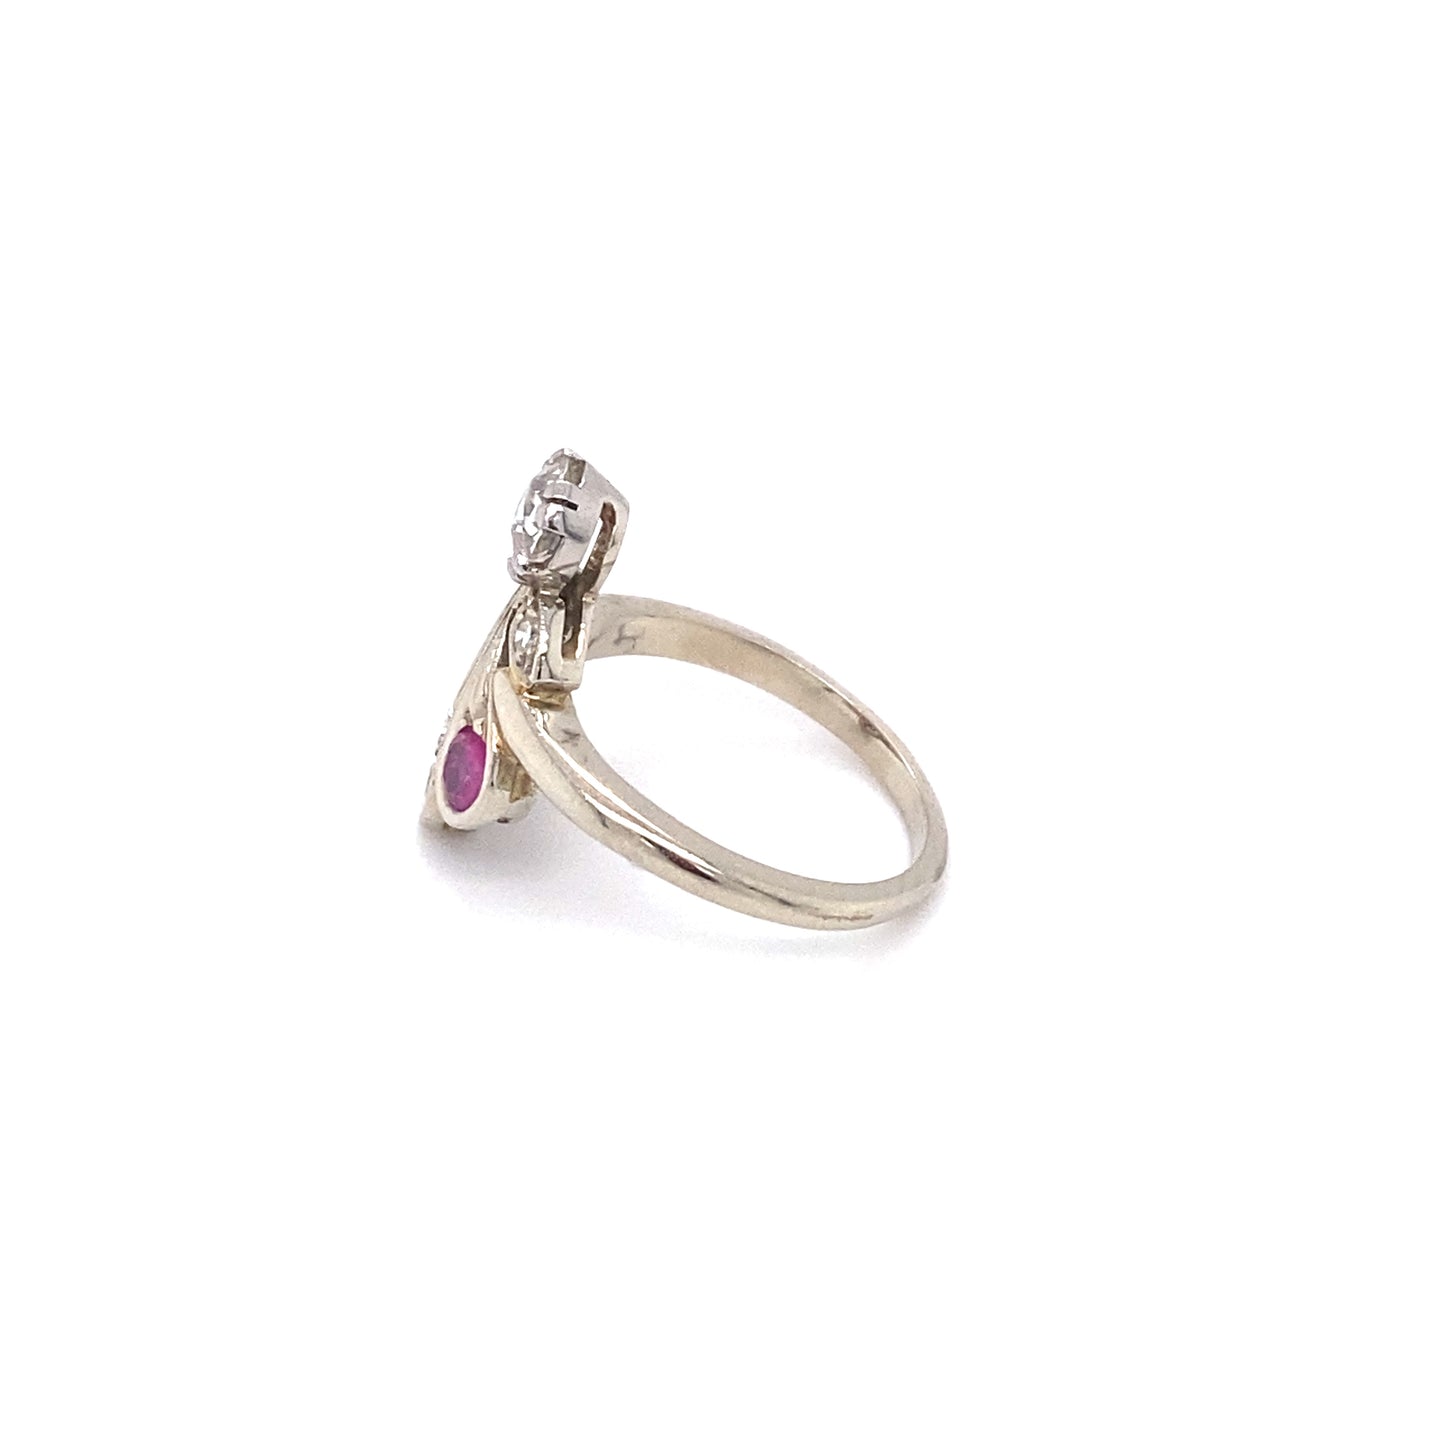 Circa 1920s 0.50 Carat Diamond and Ruby Ring in 14K White Gold